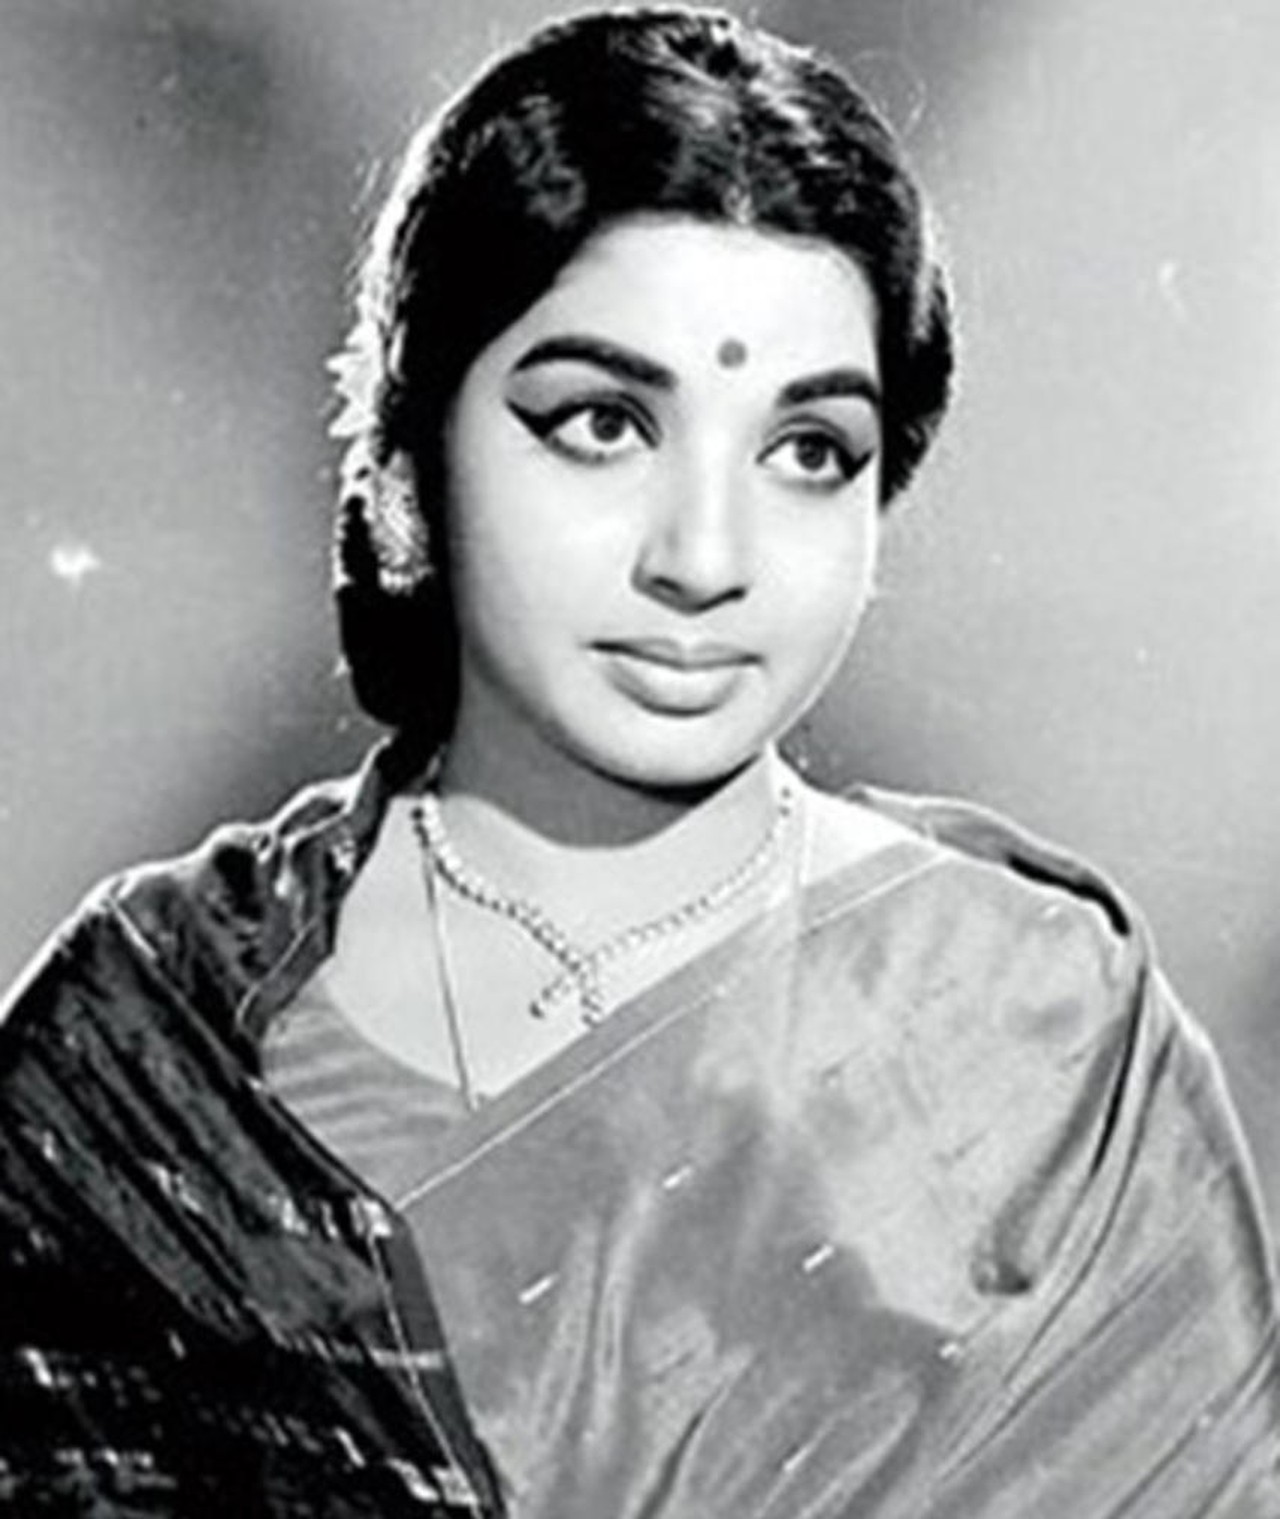 Watch Jayalalithaa Sing, Speak of Life and MGR in This Interview